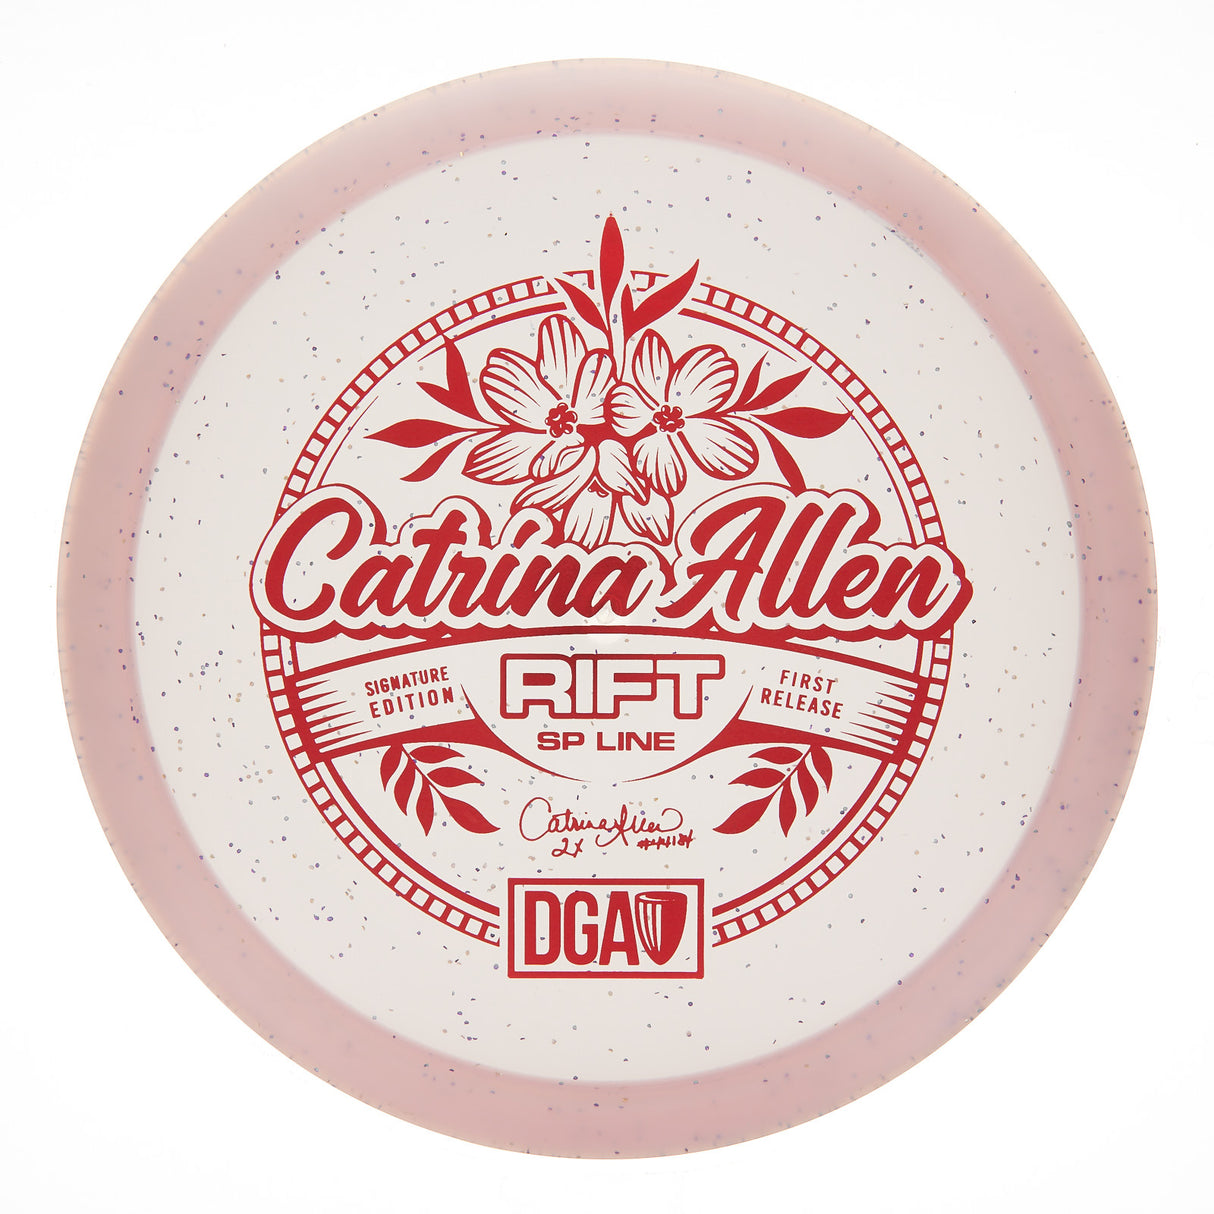 DGA Rift - Catrina Allen Signature Edition First Release SP Line 179g | Style 0001